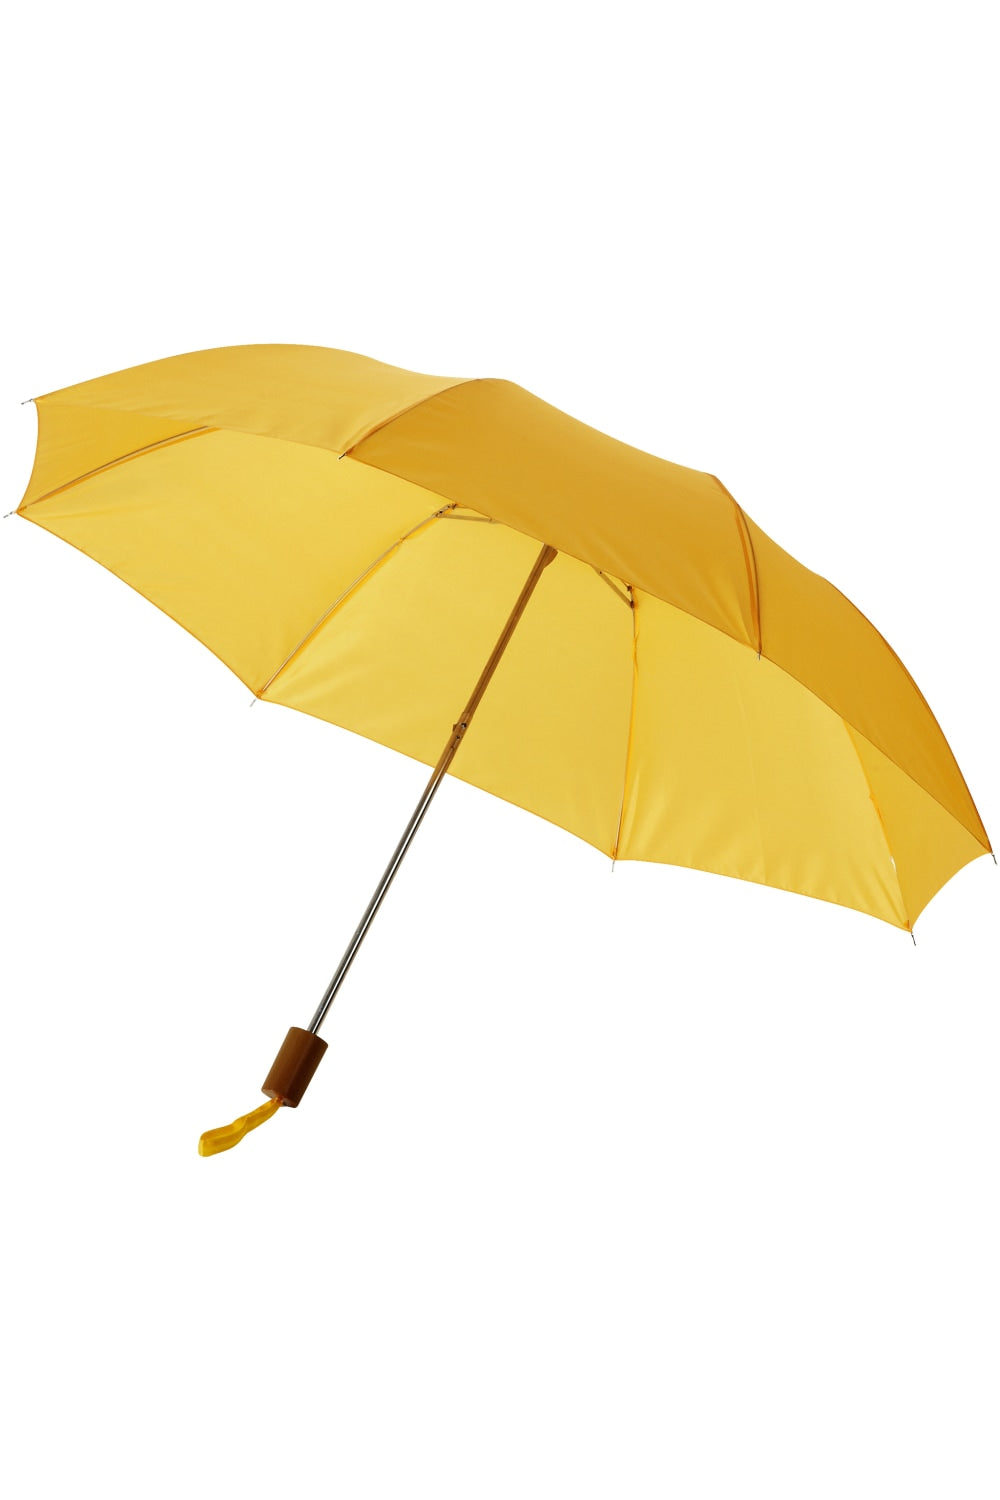 Bullet 20 Oho 2-Section Umbrella (Pack of 2) (Yellow) (14.8 x 35.4 inches)